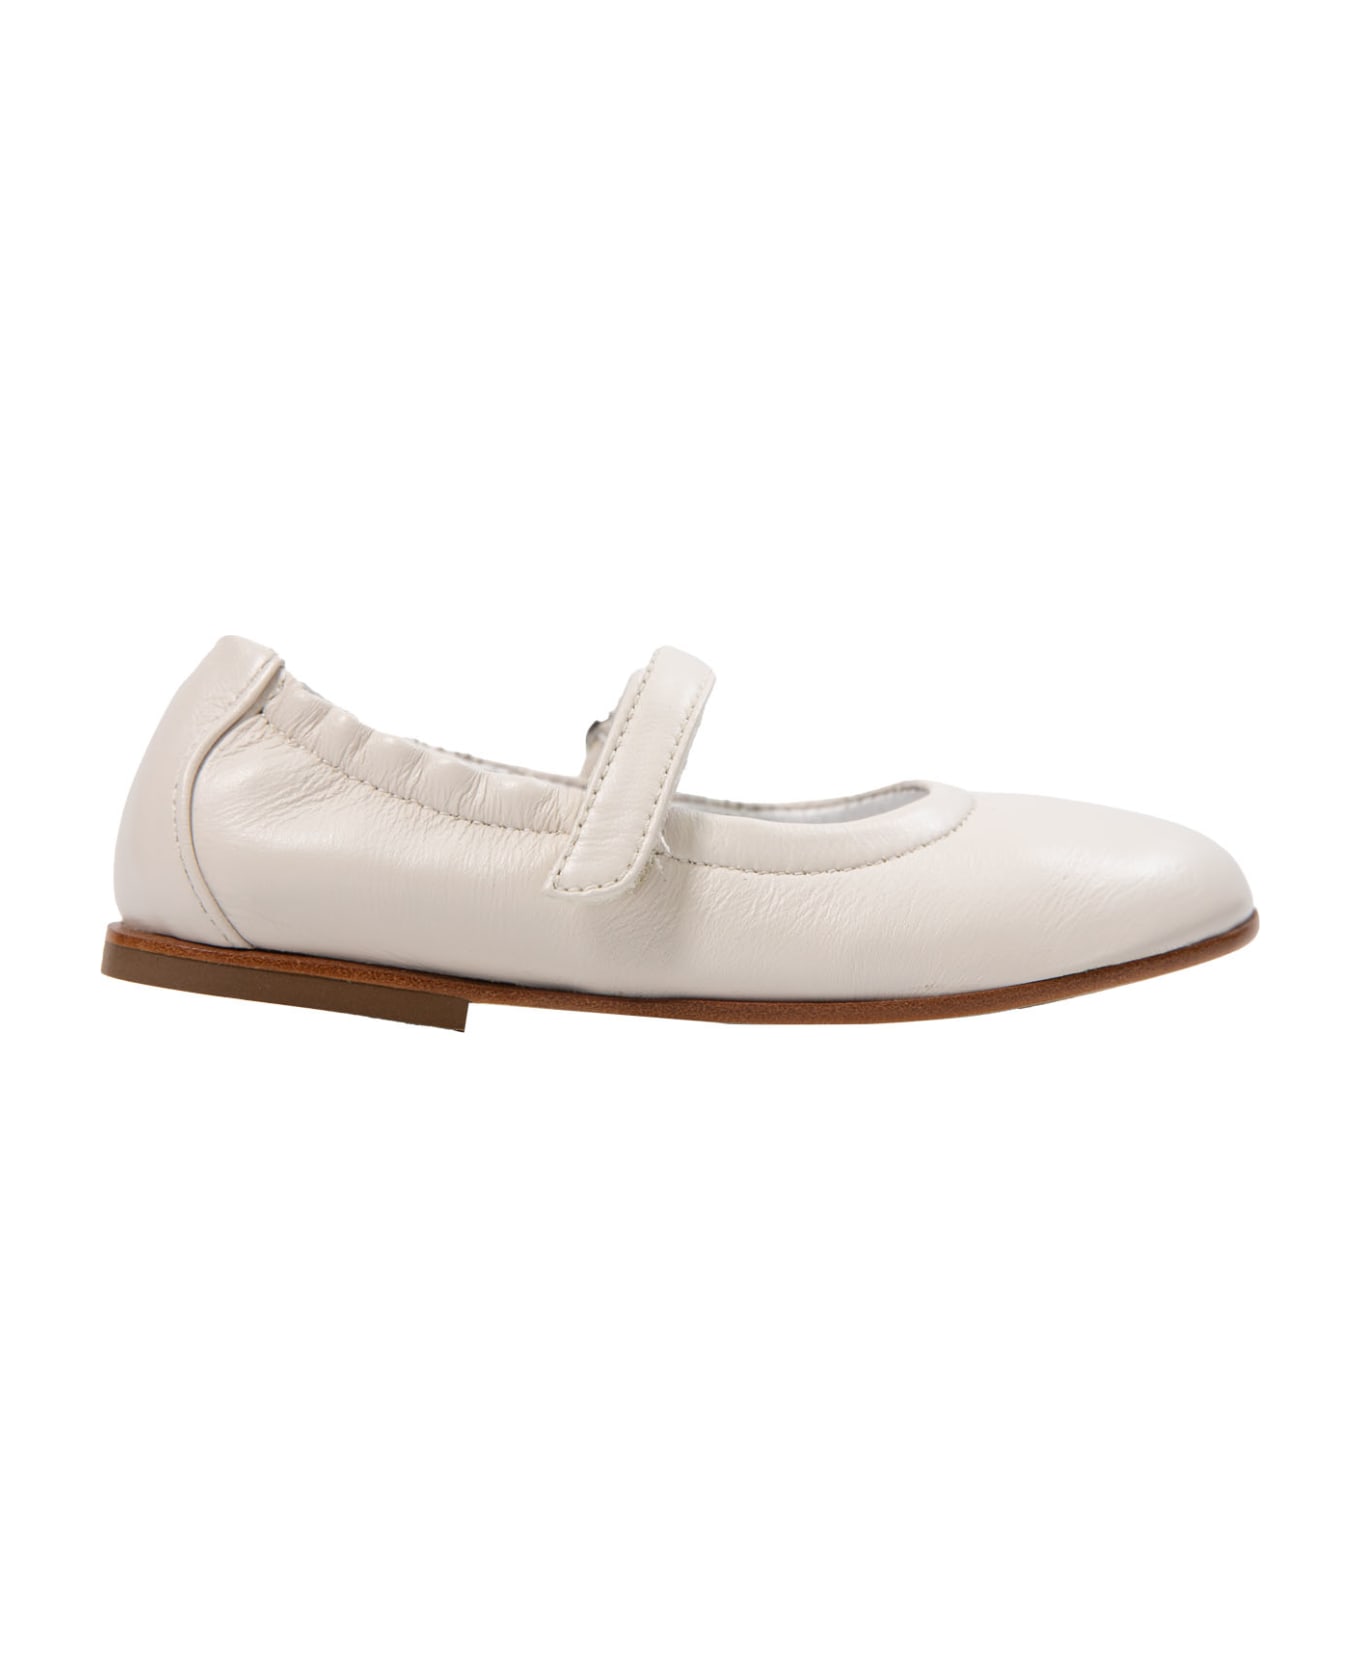 Andrea Montelpare Leather Shoes